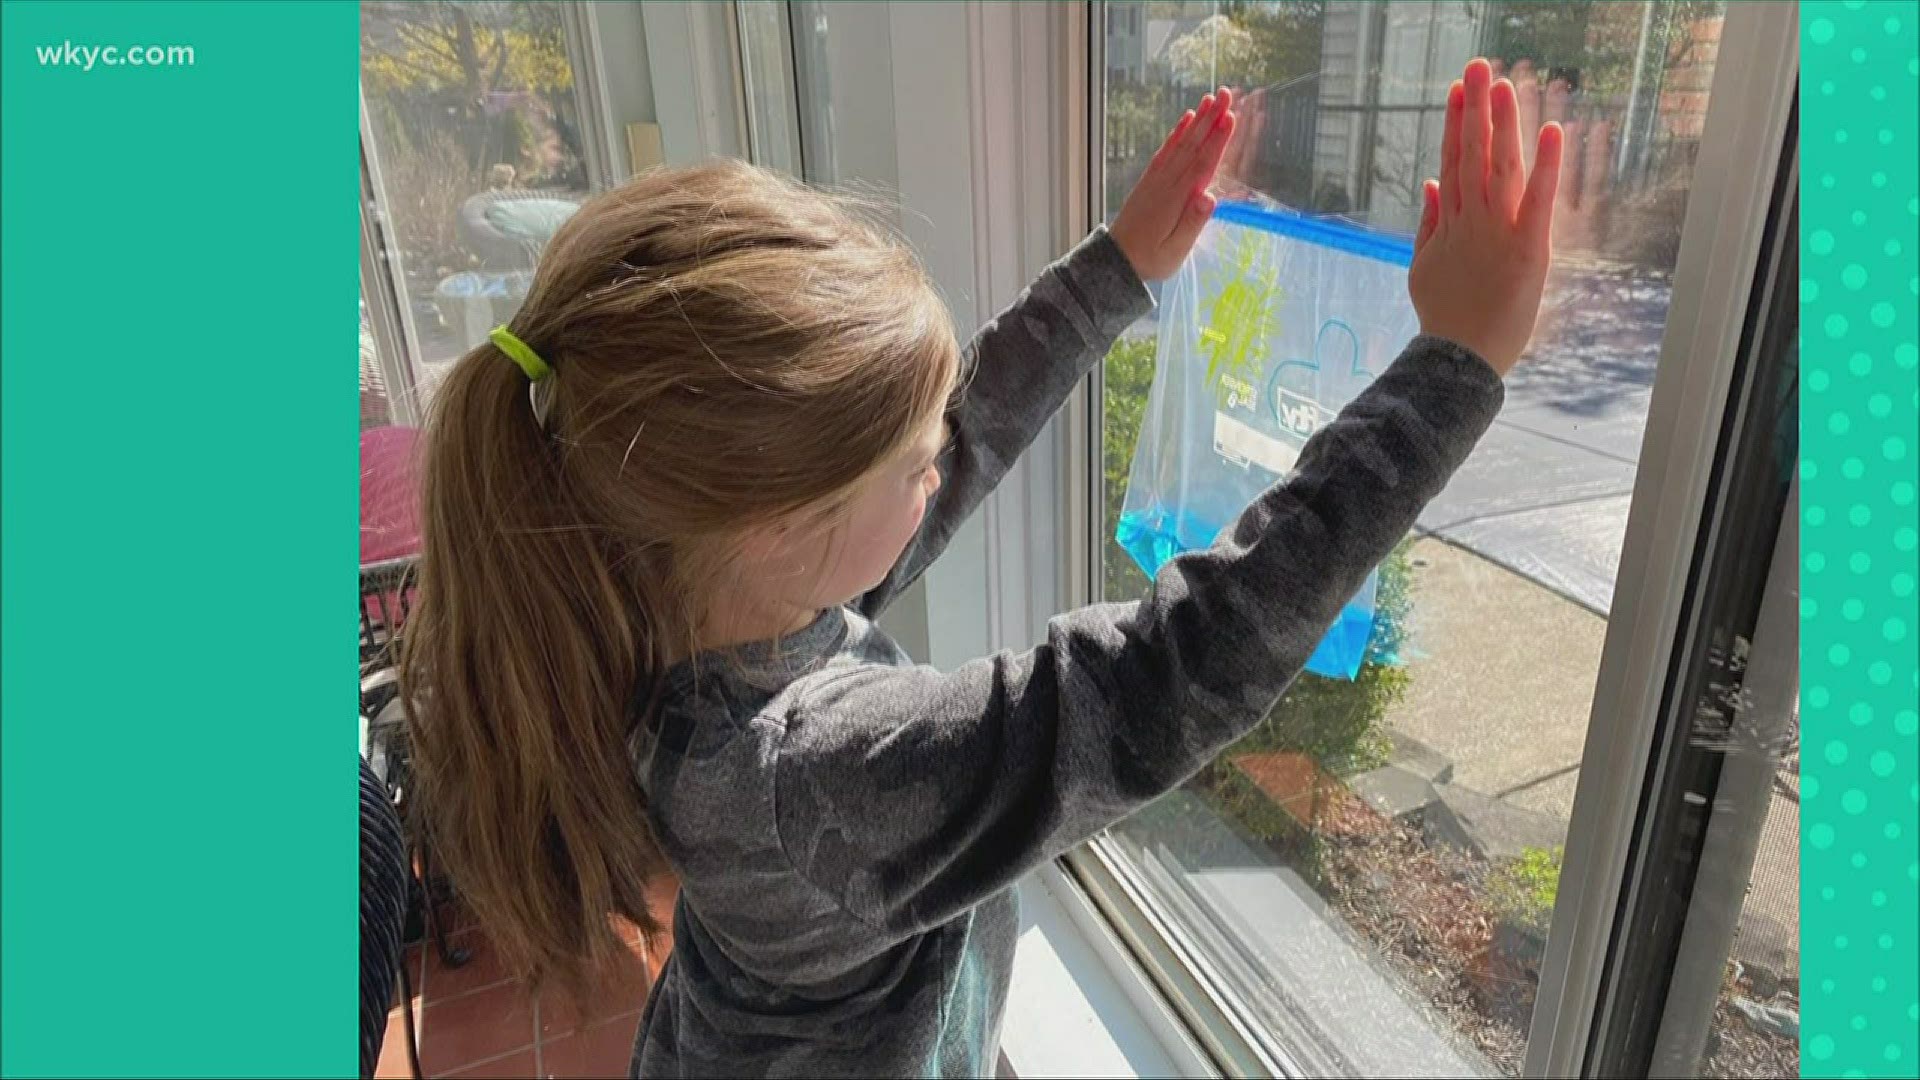 On this Earth Day, show the kids how our weather cycle works! Maureen Kyle has an easy project that only needs a plastic bag, water and a sunny window.